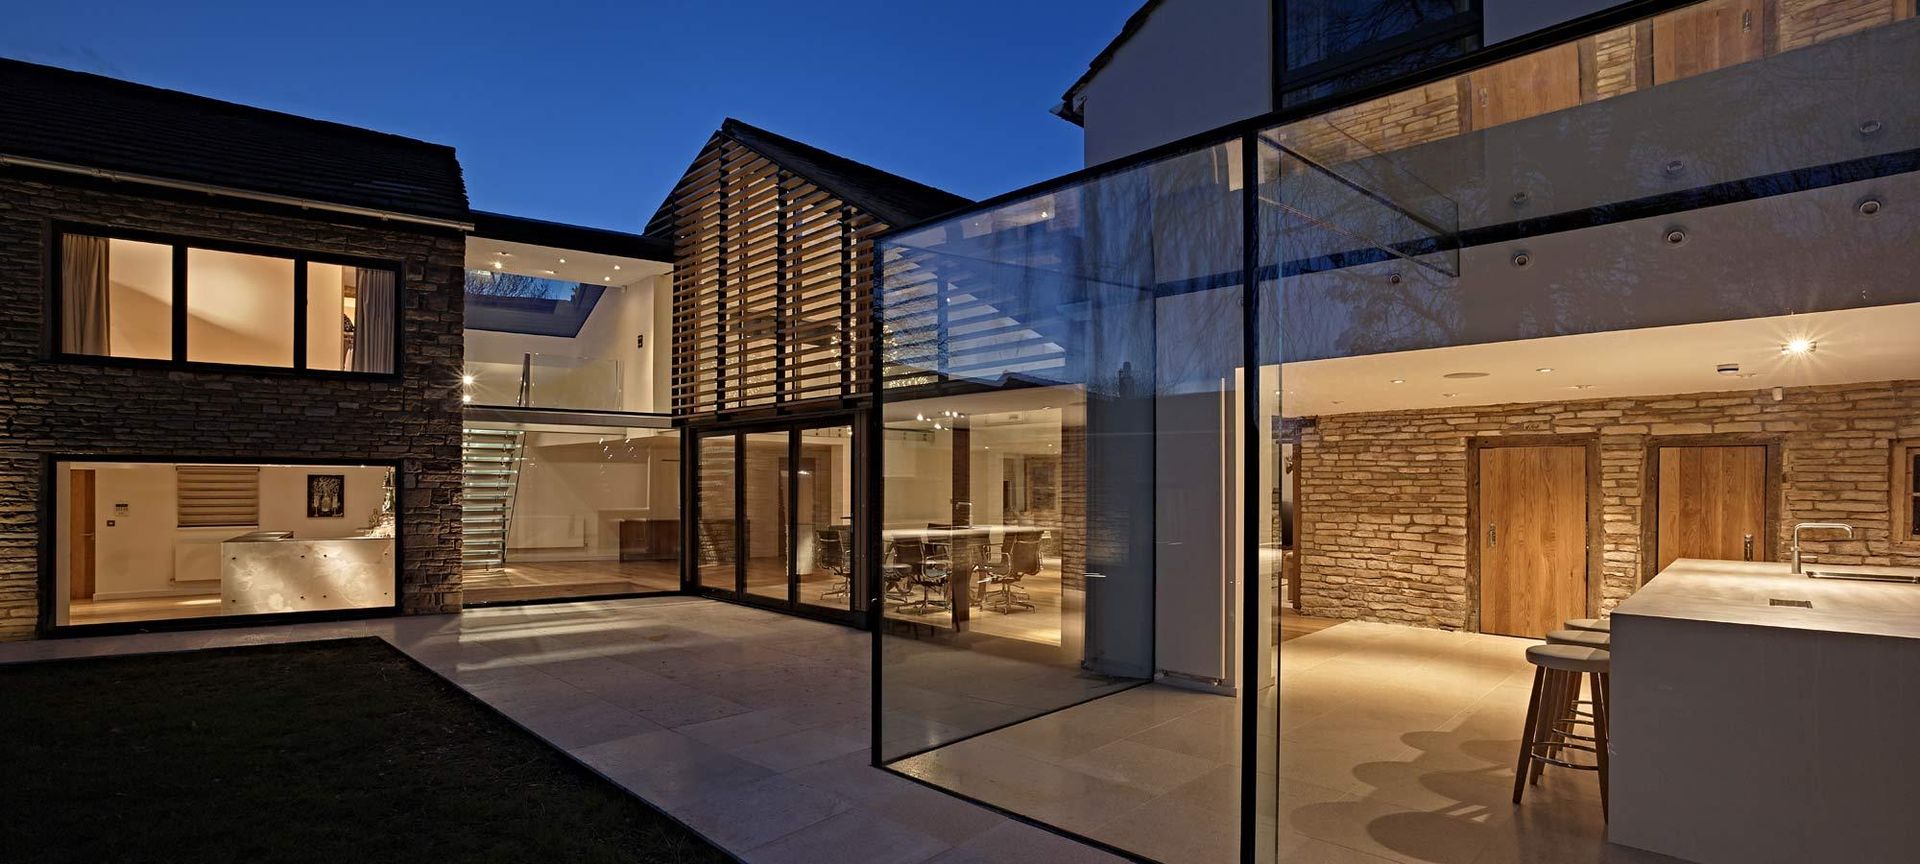 House 141, Andrew Wallace Architects Andrew Wallace Architects Casas minimalistas